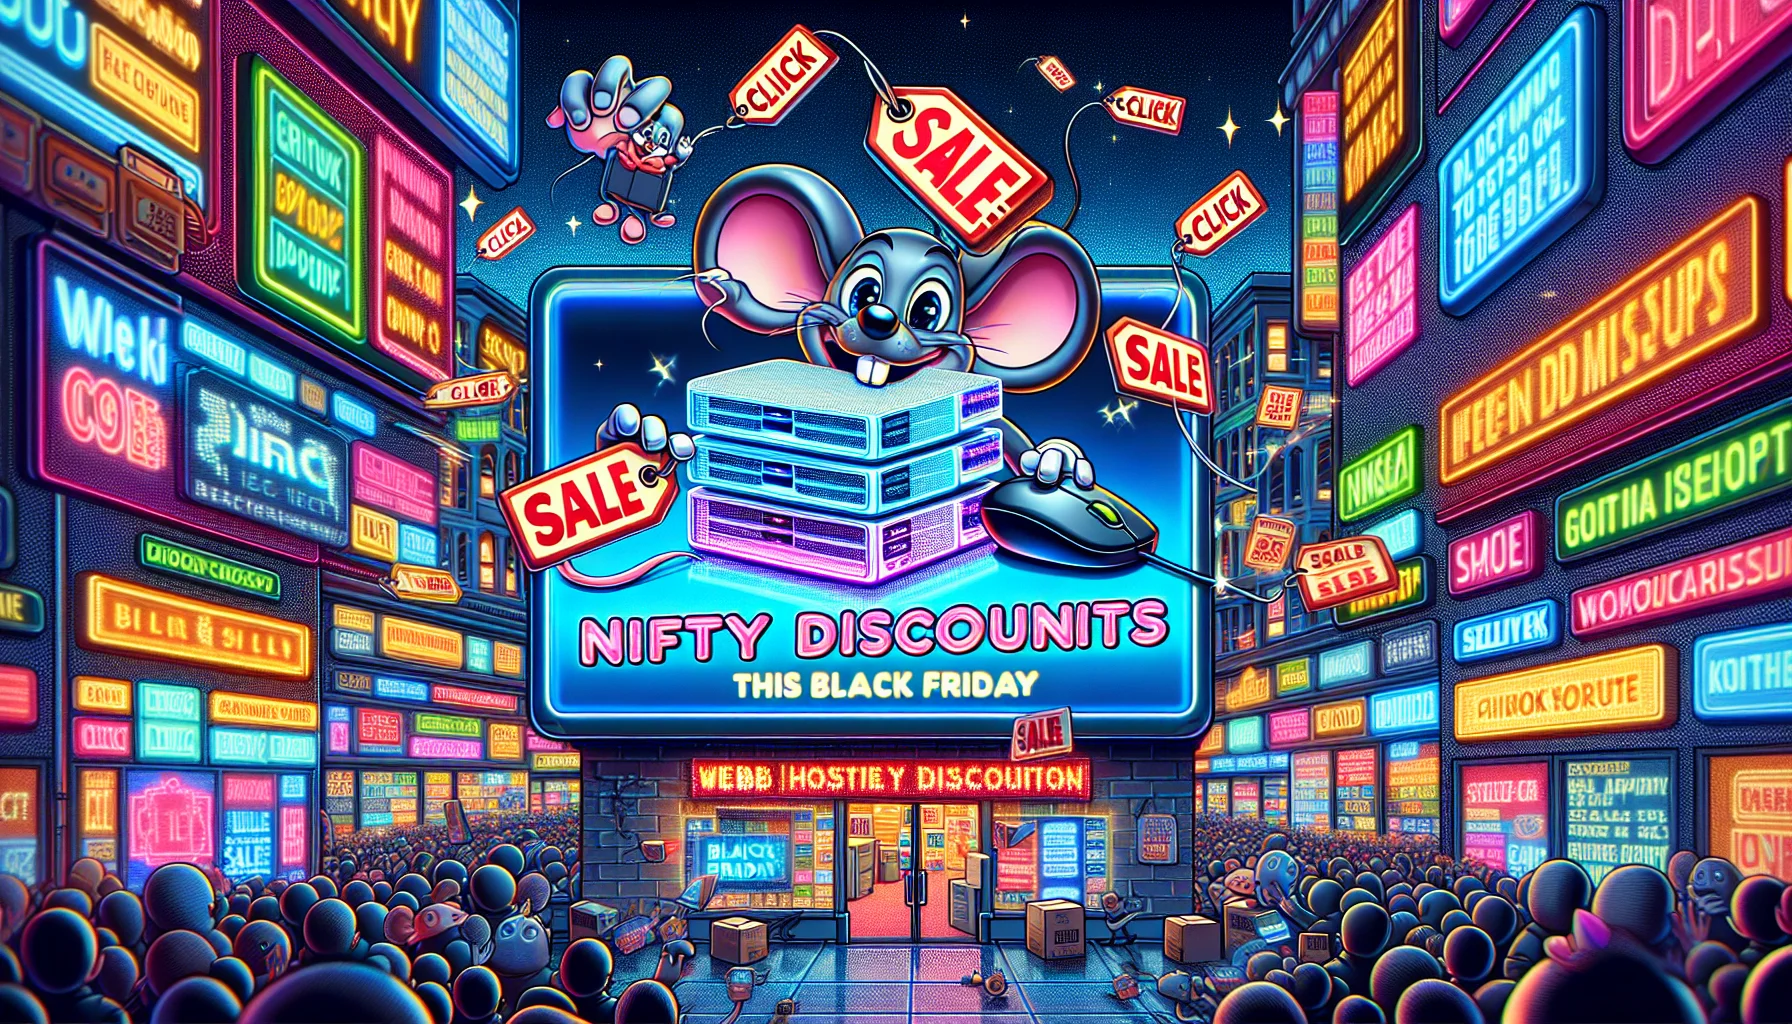 Create an amusing and enticing image depicting a Black Friday discount scenario for web hosting. Picture a bustling digital marketplace, filled with vibrant colors and shining neon signs, centered around a giant digital billboard. A catchy slogan lights up on the billboard, reading 'Nifty Discounts this Black Friday', underneath which there is a caricatured computer mouse wearing a sale tag. The mouse is laughing while throwing virtual web servers over its head, each tagged with huge discounts. Comic-style onomatopoeic words are scattered throughout the scene like 'CLICK', 'BARGAIN', and 'SALE'. The focus of this image is anticipation, delight, and surprise.